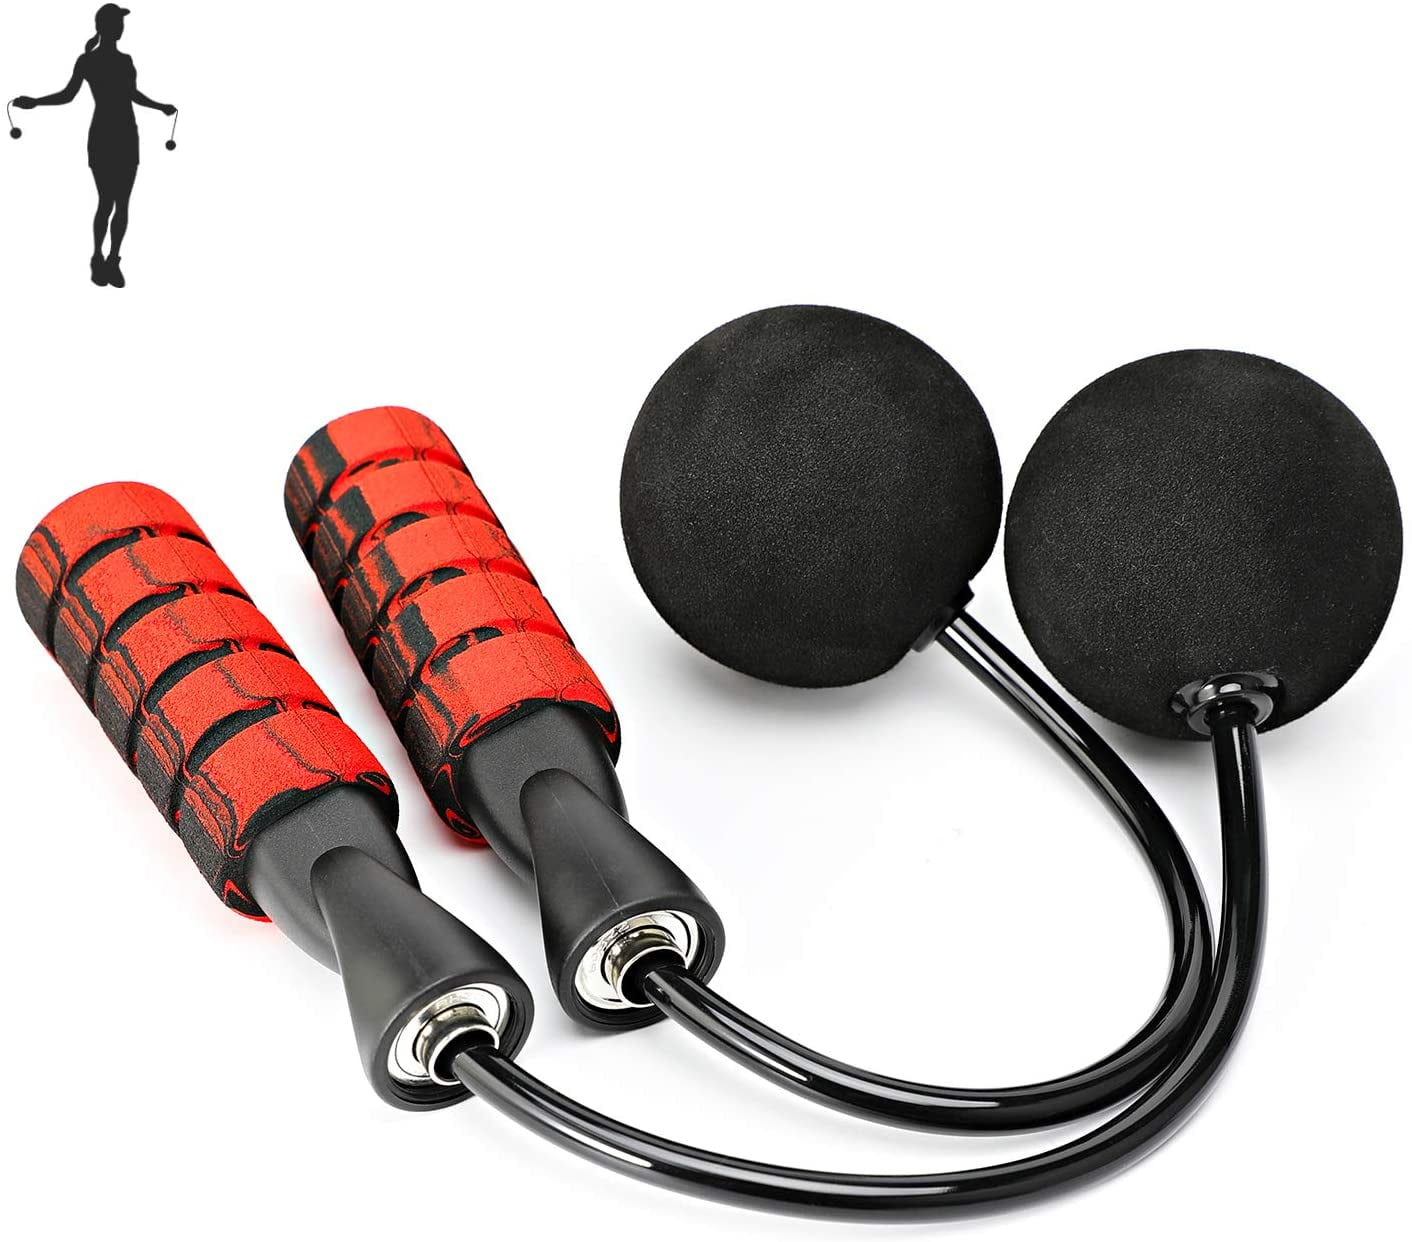 Crossfit Double Unders and Home Gym Workout with App Analysis Jumping Rope for Kids Ropeless Jumprope Fitness Gym Jump Roap for Women and Men Skipping Rope FRESH FIRE Cordless Jump Rope Adult and Kids with Counter and Calorie 